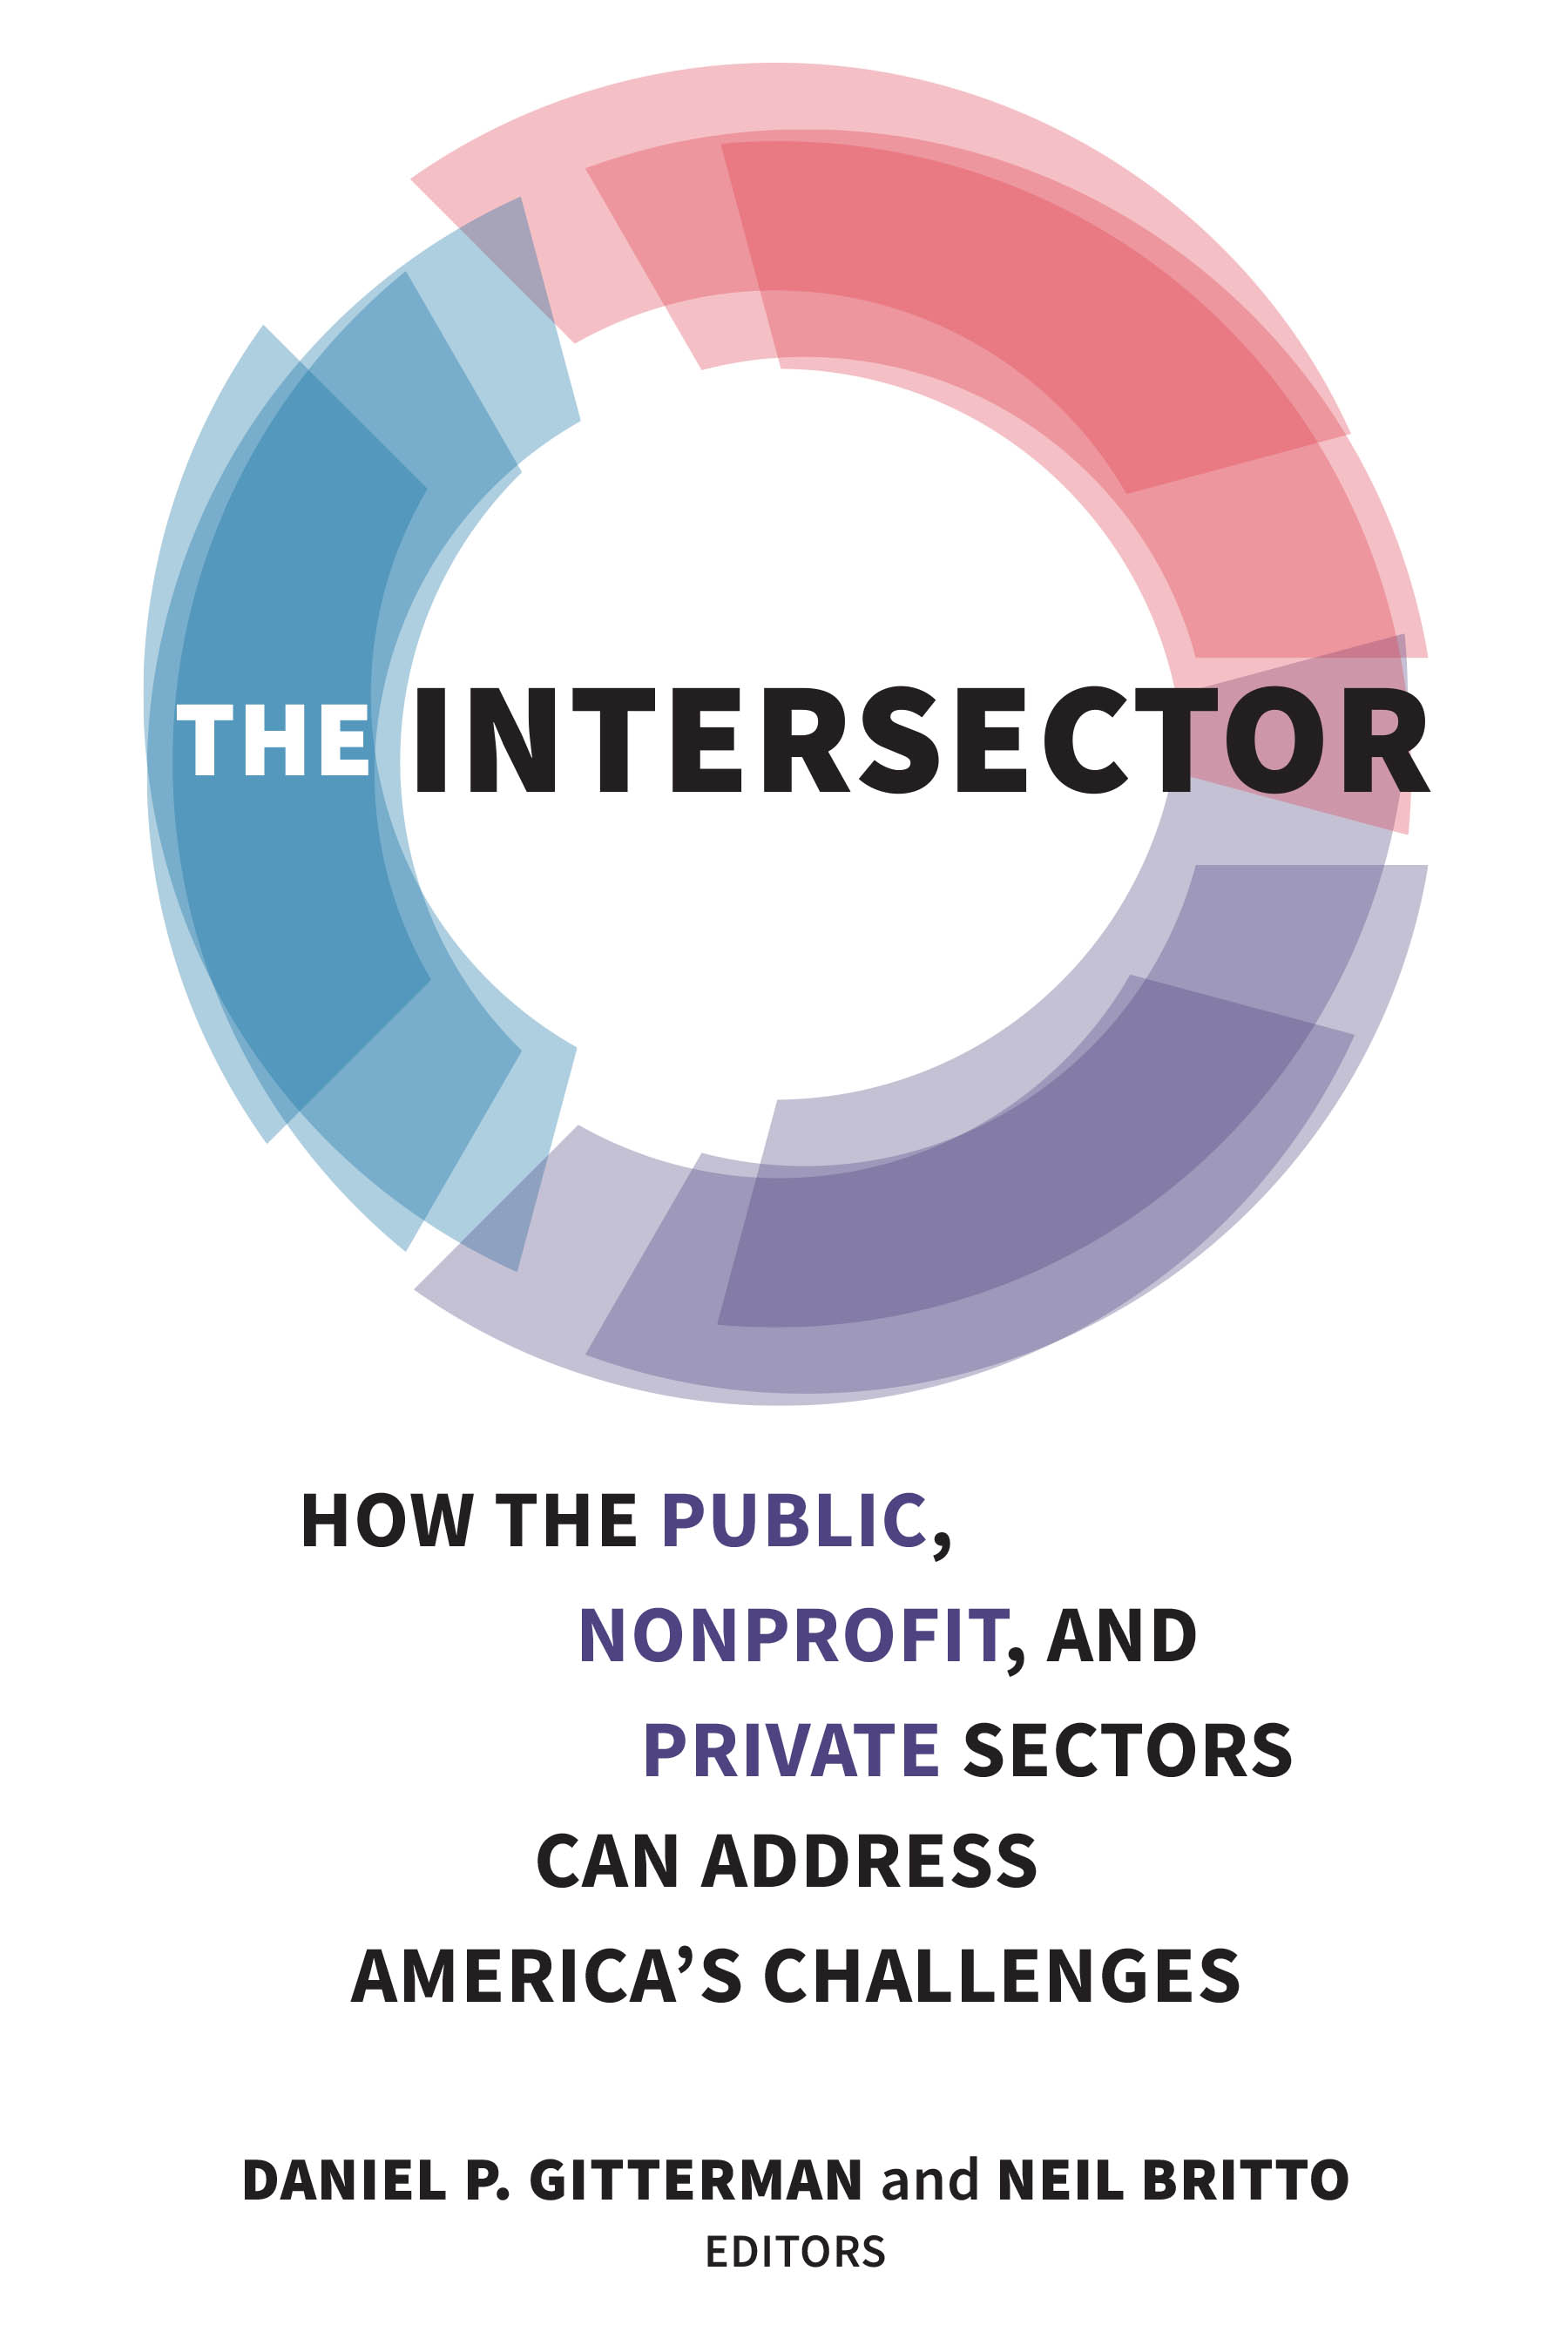 The Intersector: How the Public, Nonprofit, and Private Sectors Can Address America's Challenges